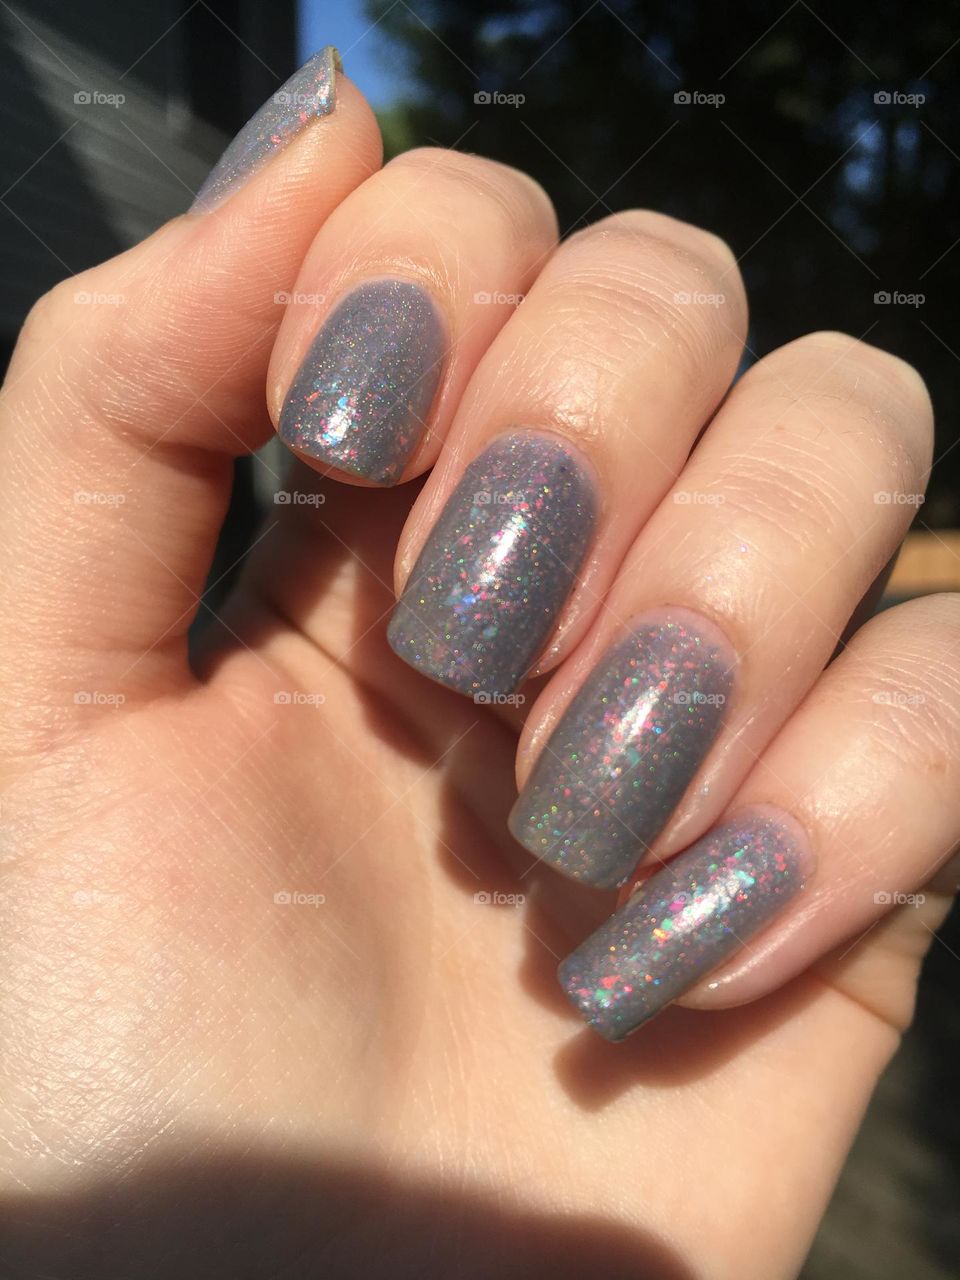 Colorful gray pained nails